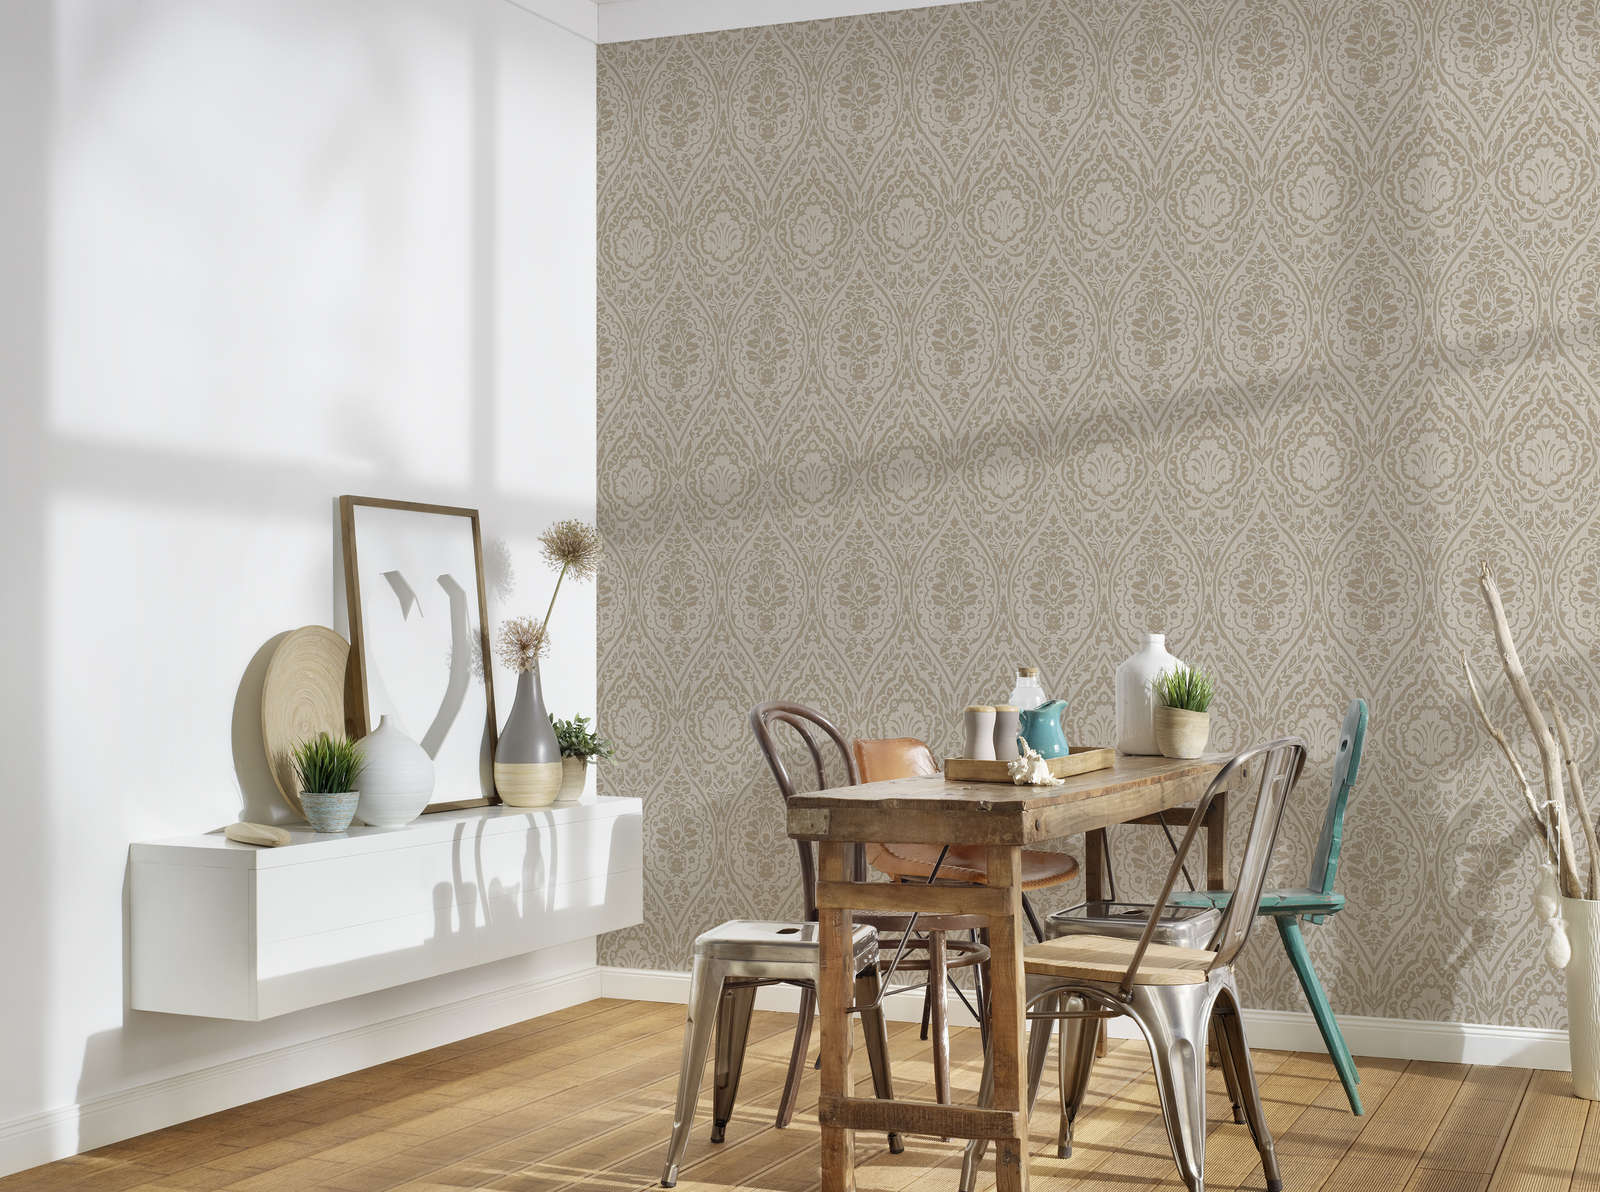             Wallpaper floral pattern with colonial style ornaments - beige, brown
        